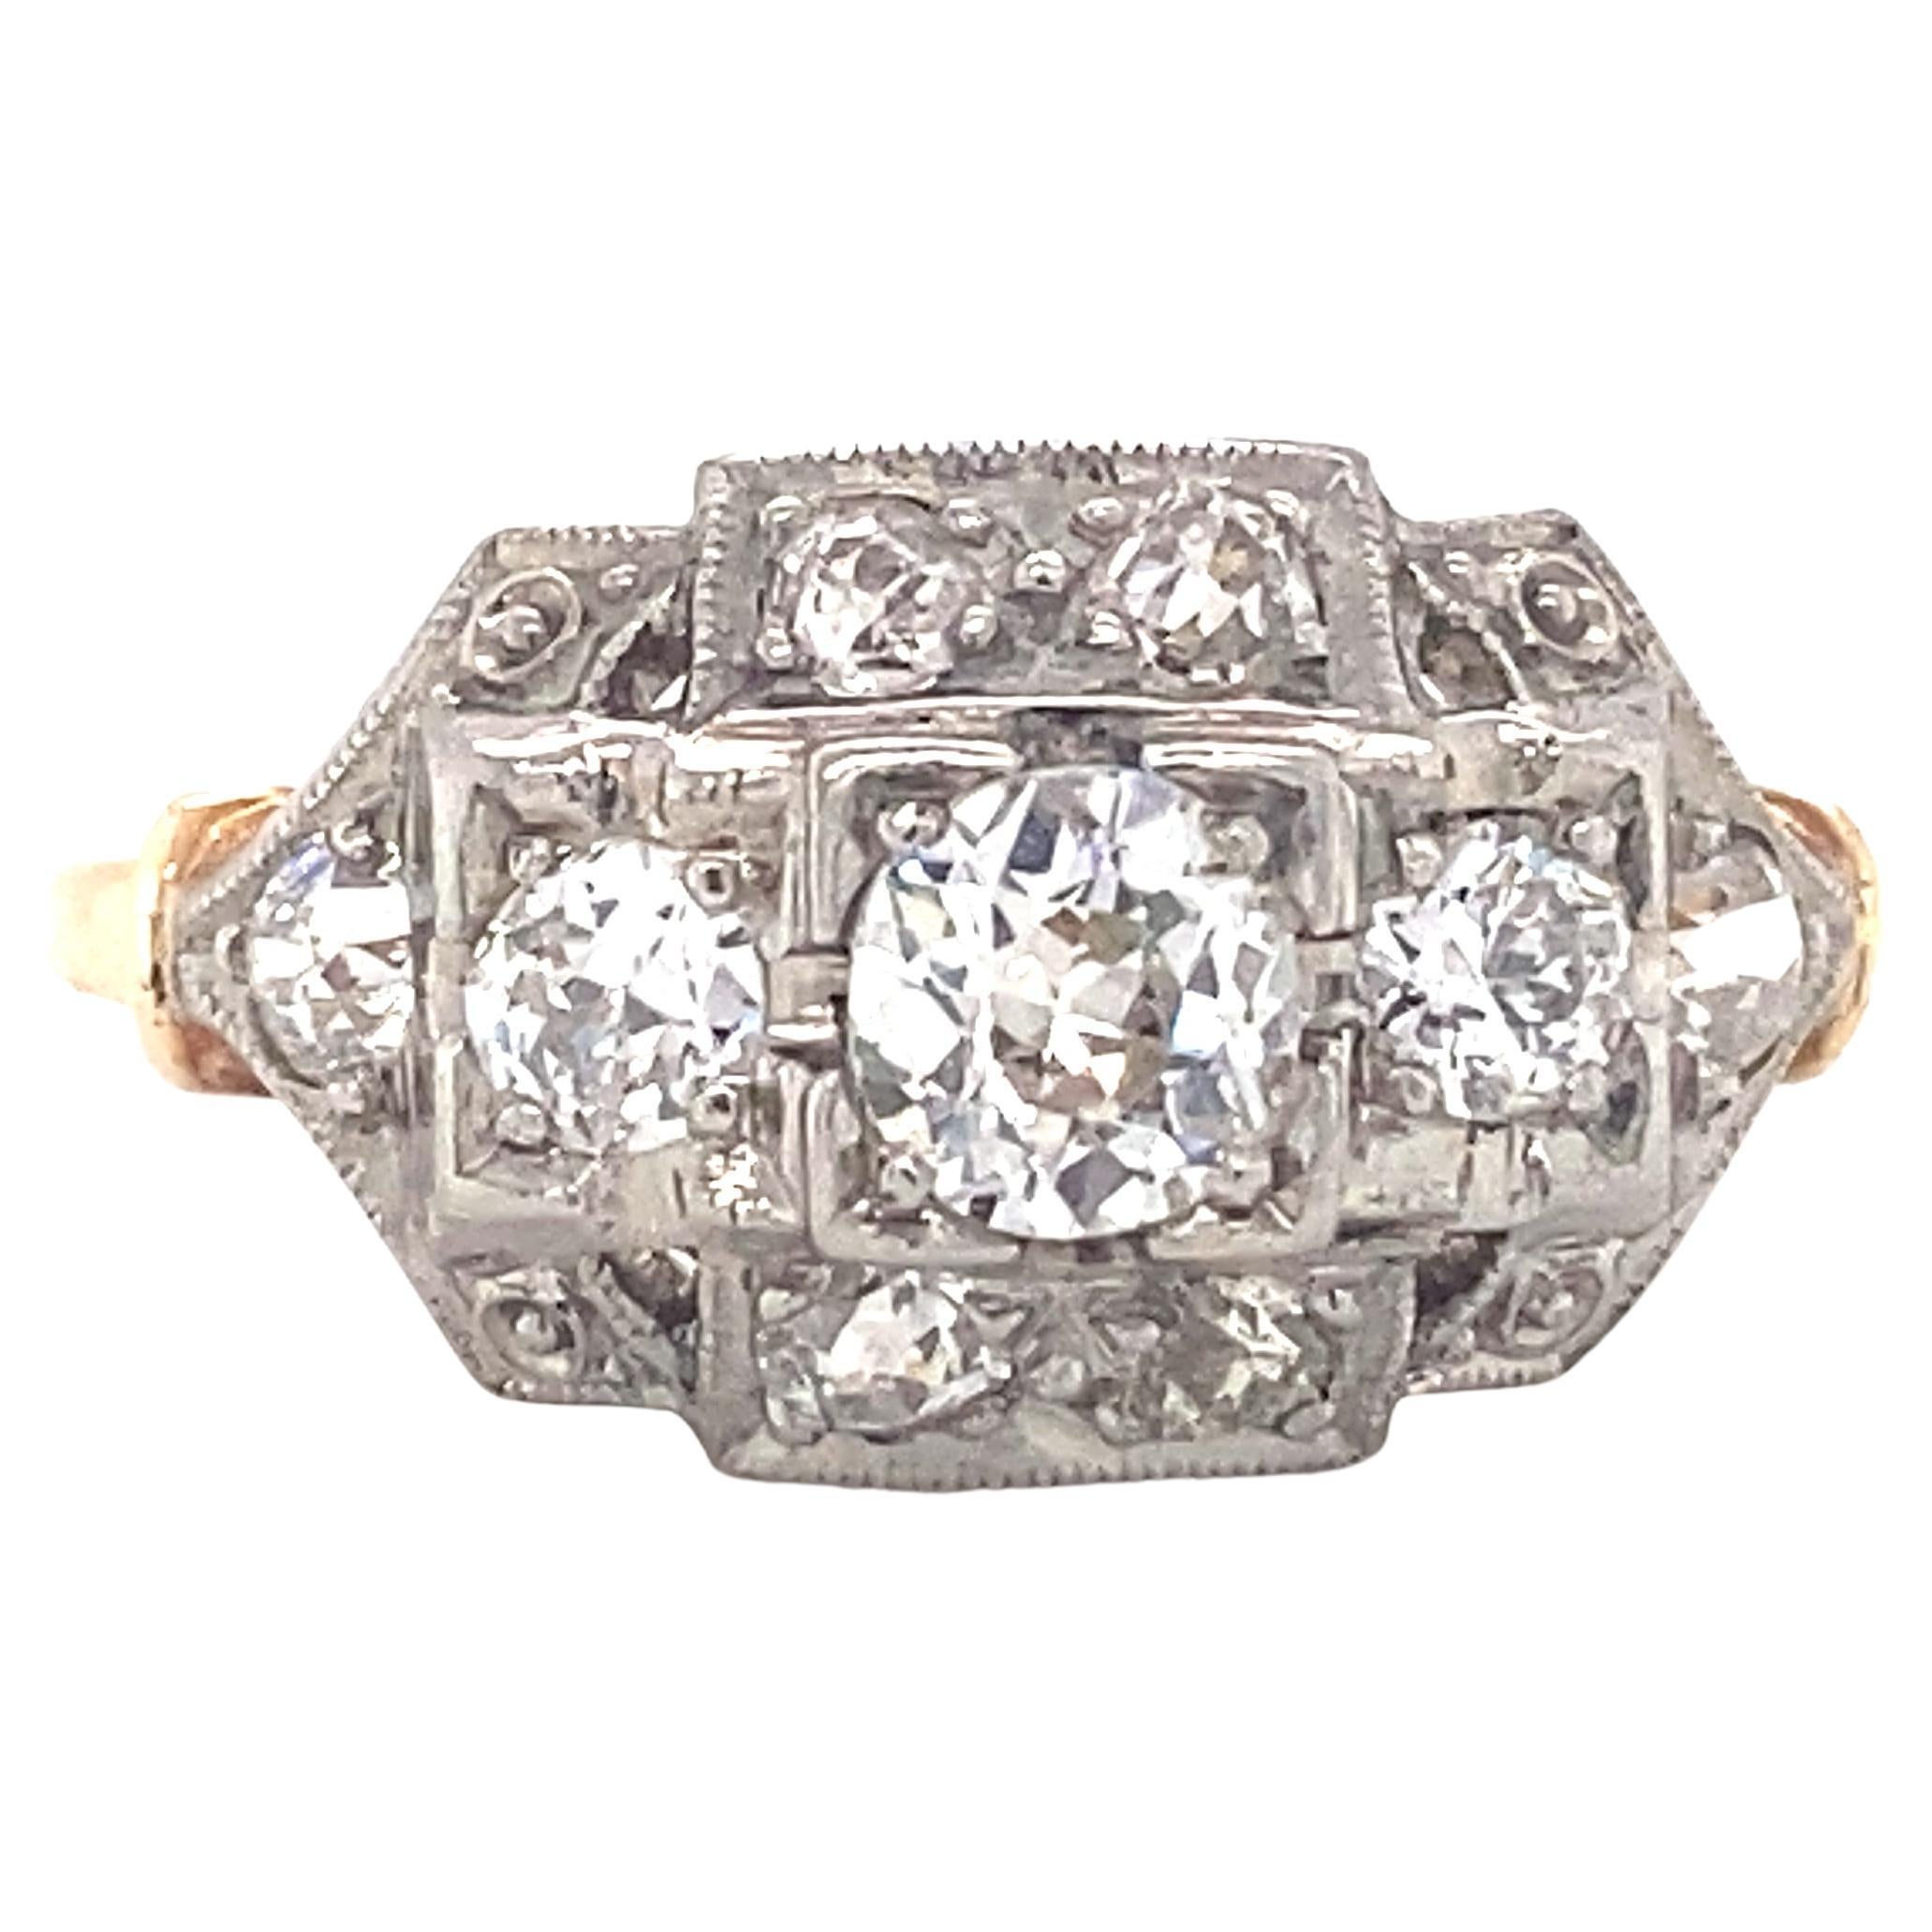 circa 1920s Art Deco Jabel 1 Carat Diamond Ring in Two Tone 14K Gold For Sale